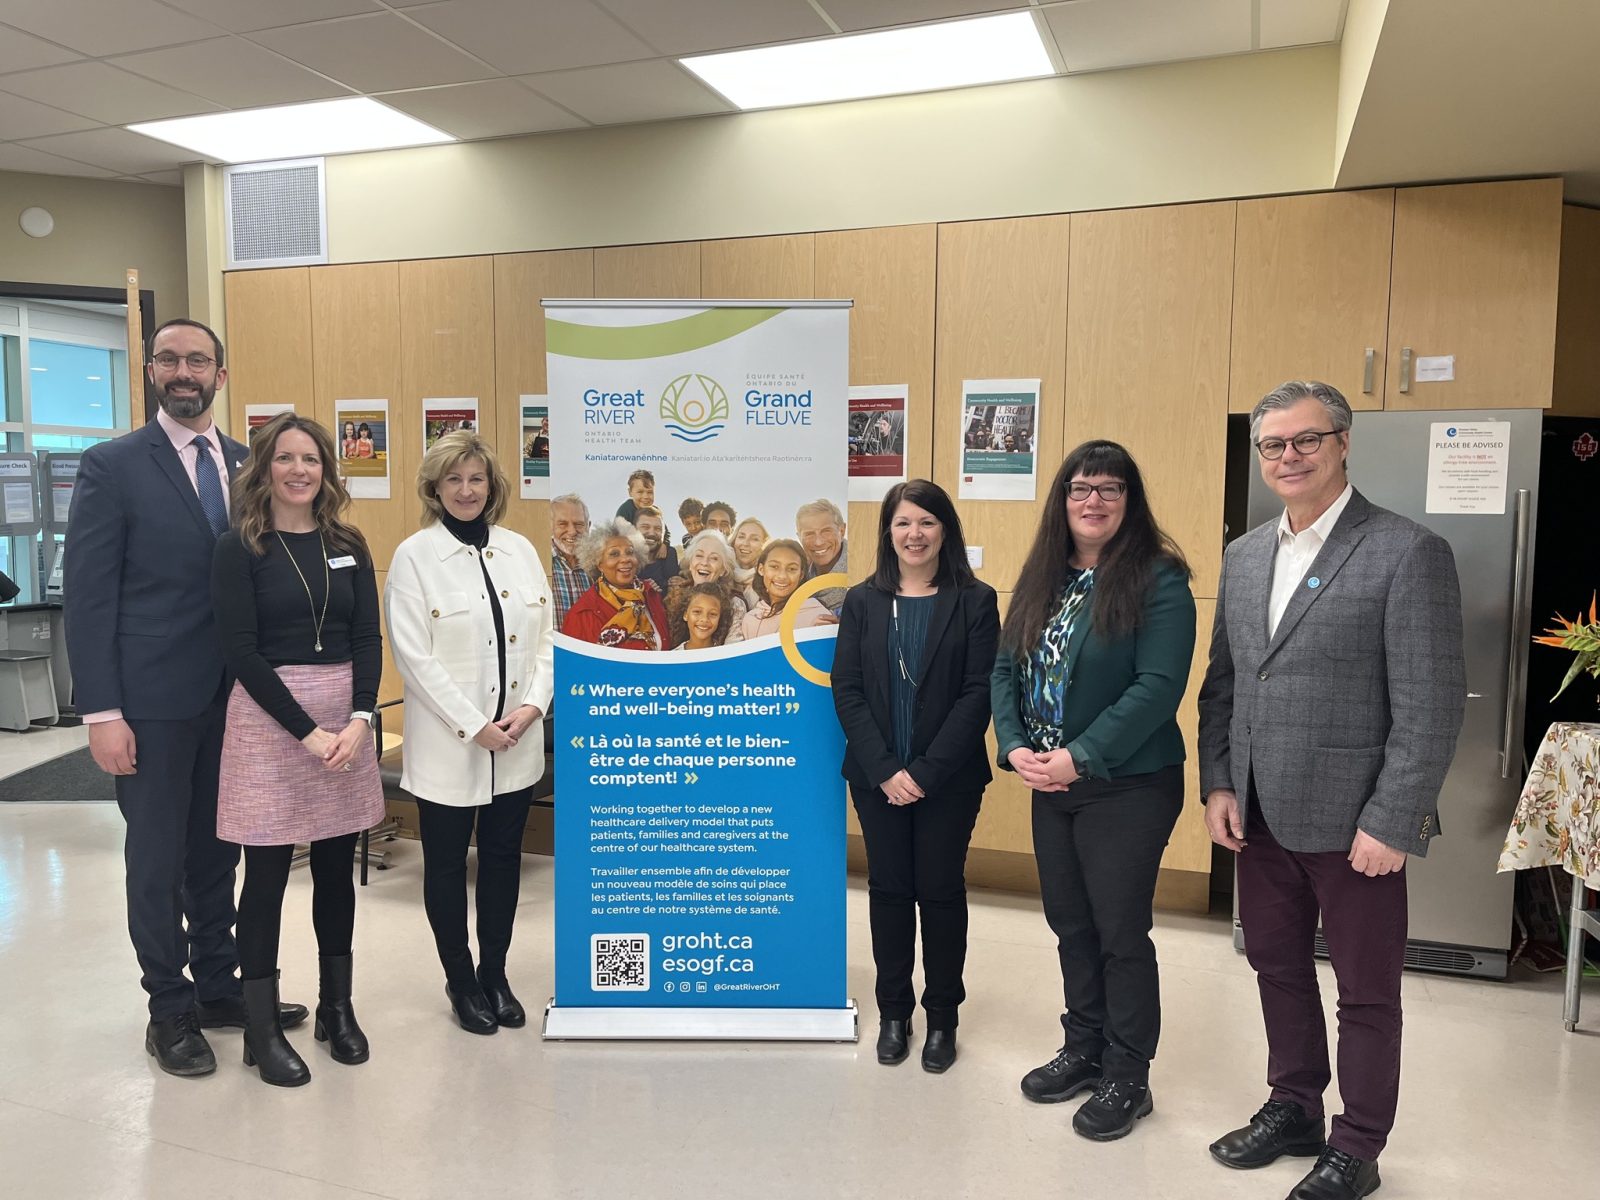 Ontario Connecting up to 19,340 People to Primary Care Teams in our Community